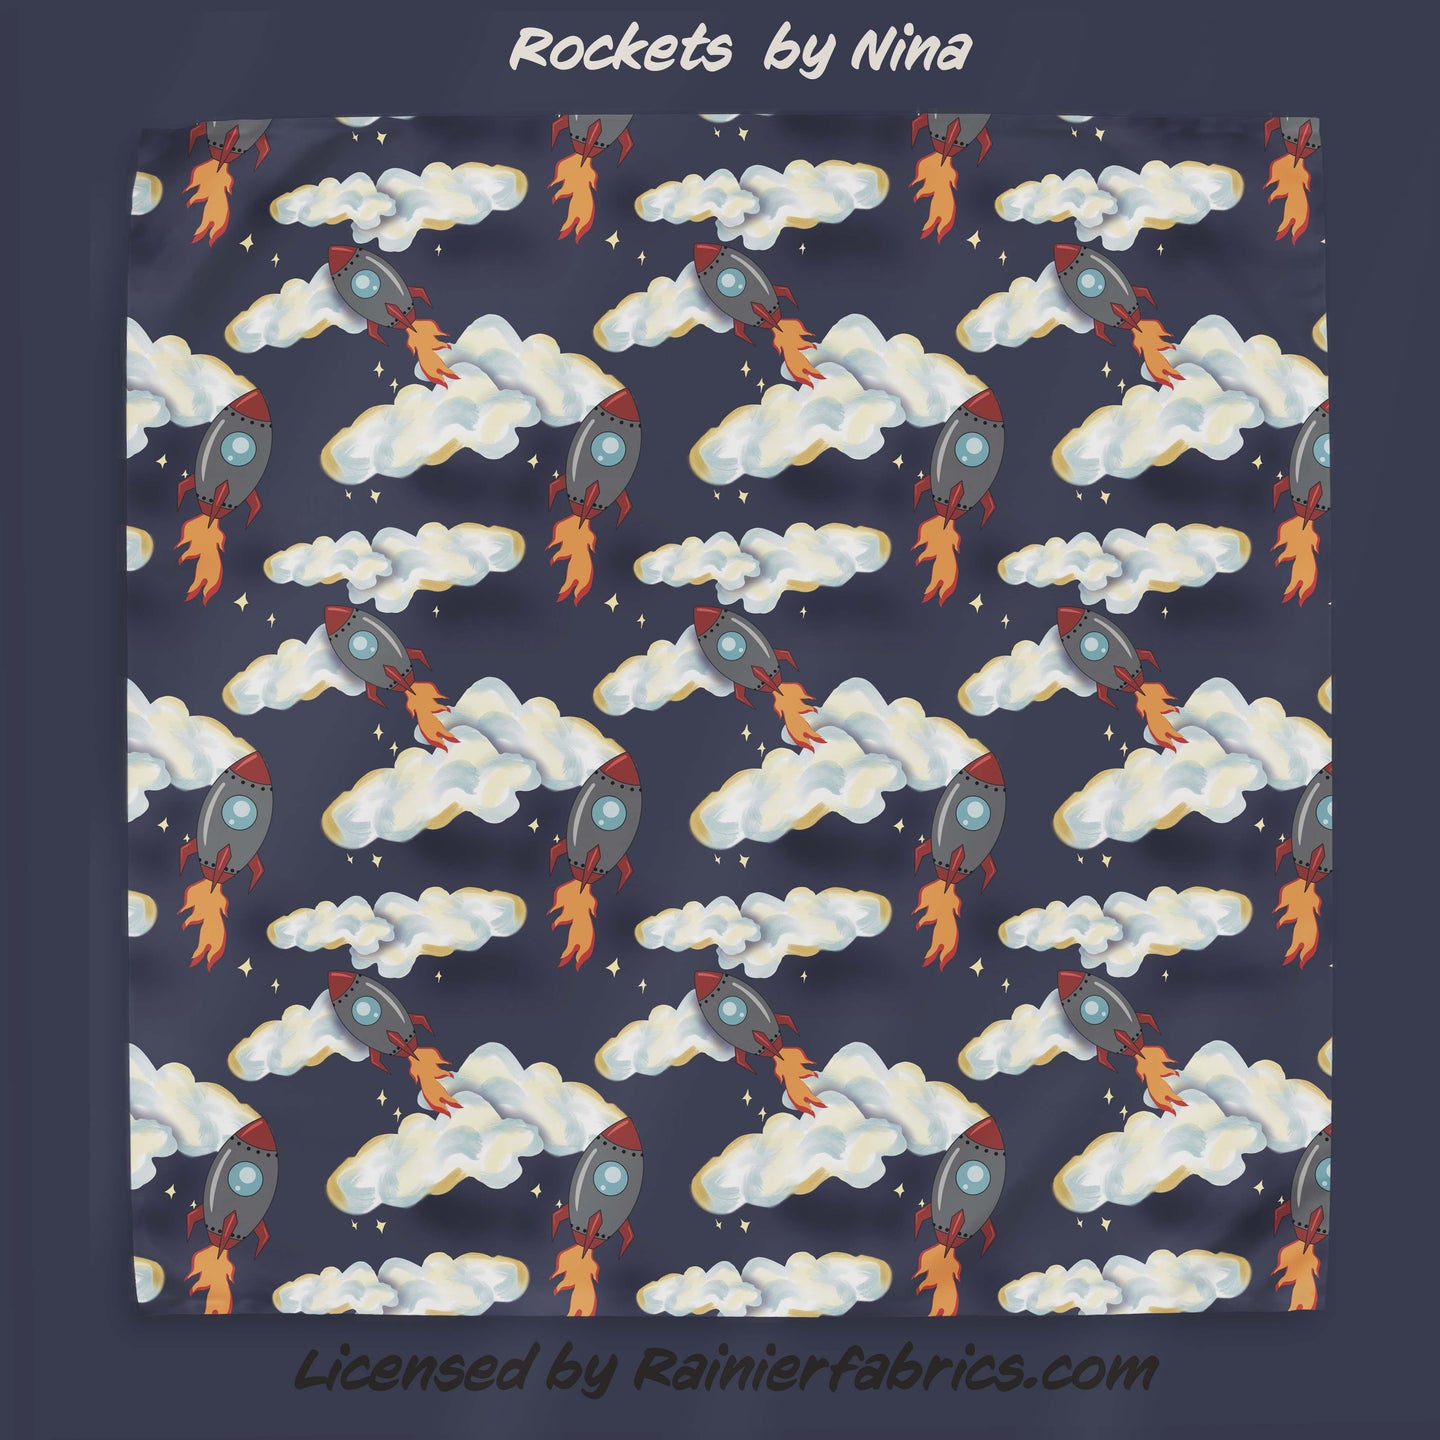 Rockets by Nina - Rainier Fabrics Exclusive! - 2-5 day TAT - Order by 1/2 yard; Blankets and towels available too